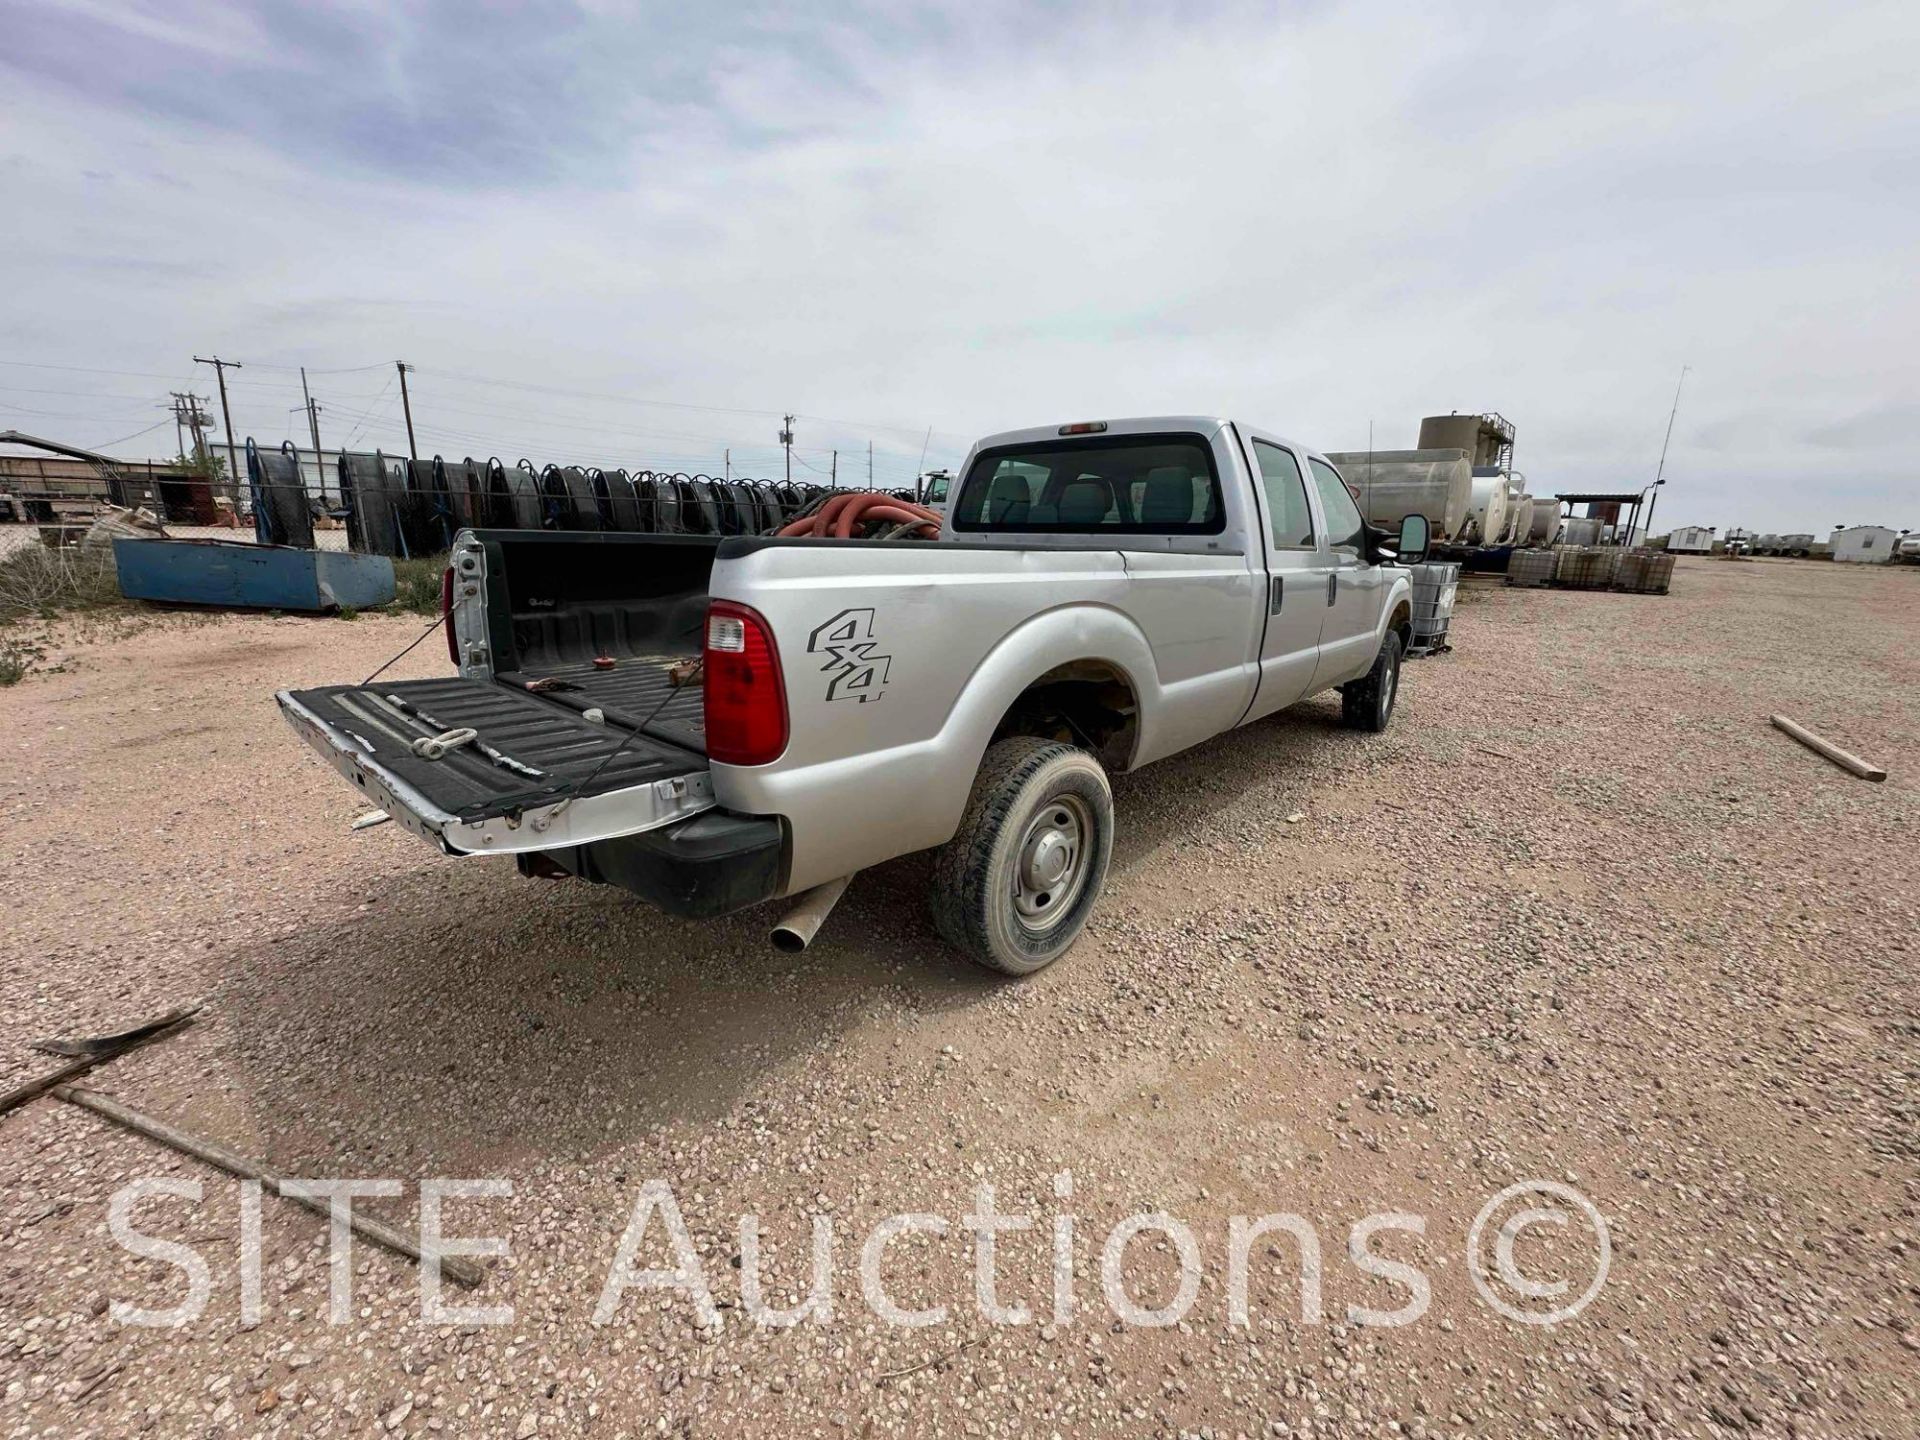 2011 Ford F350 SD Crew Cab Pickup Truck - Image 4 of 19